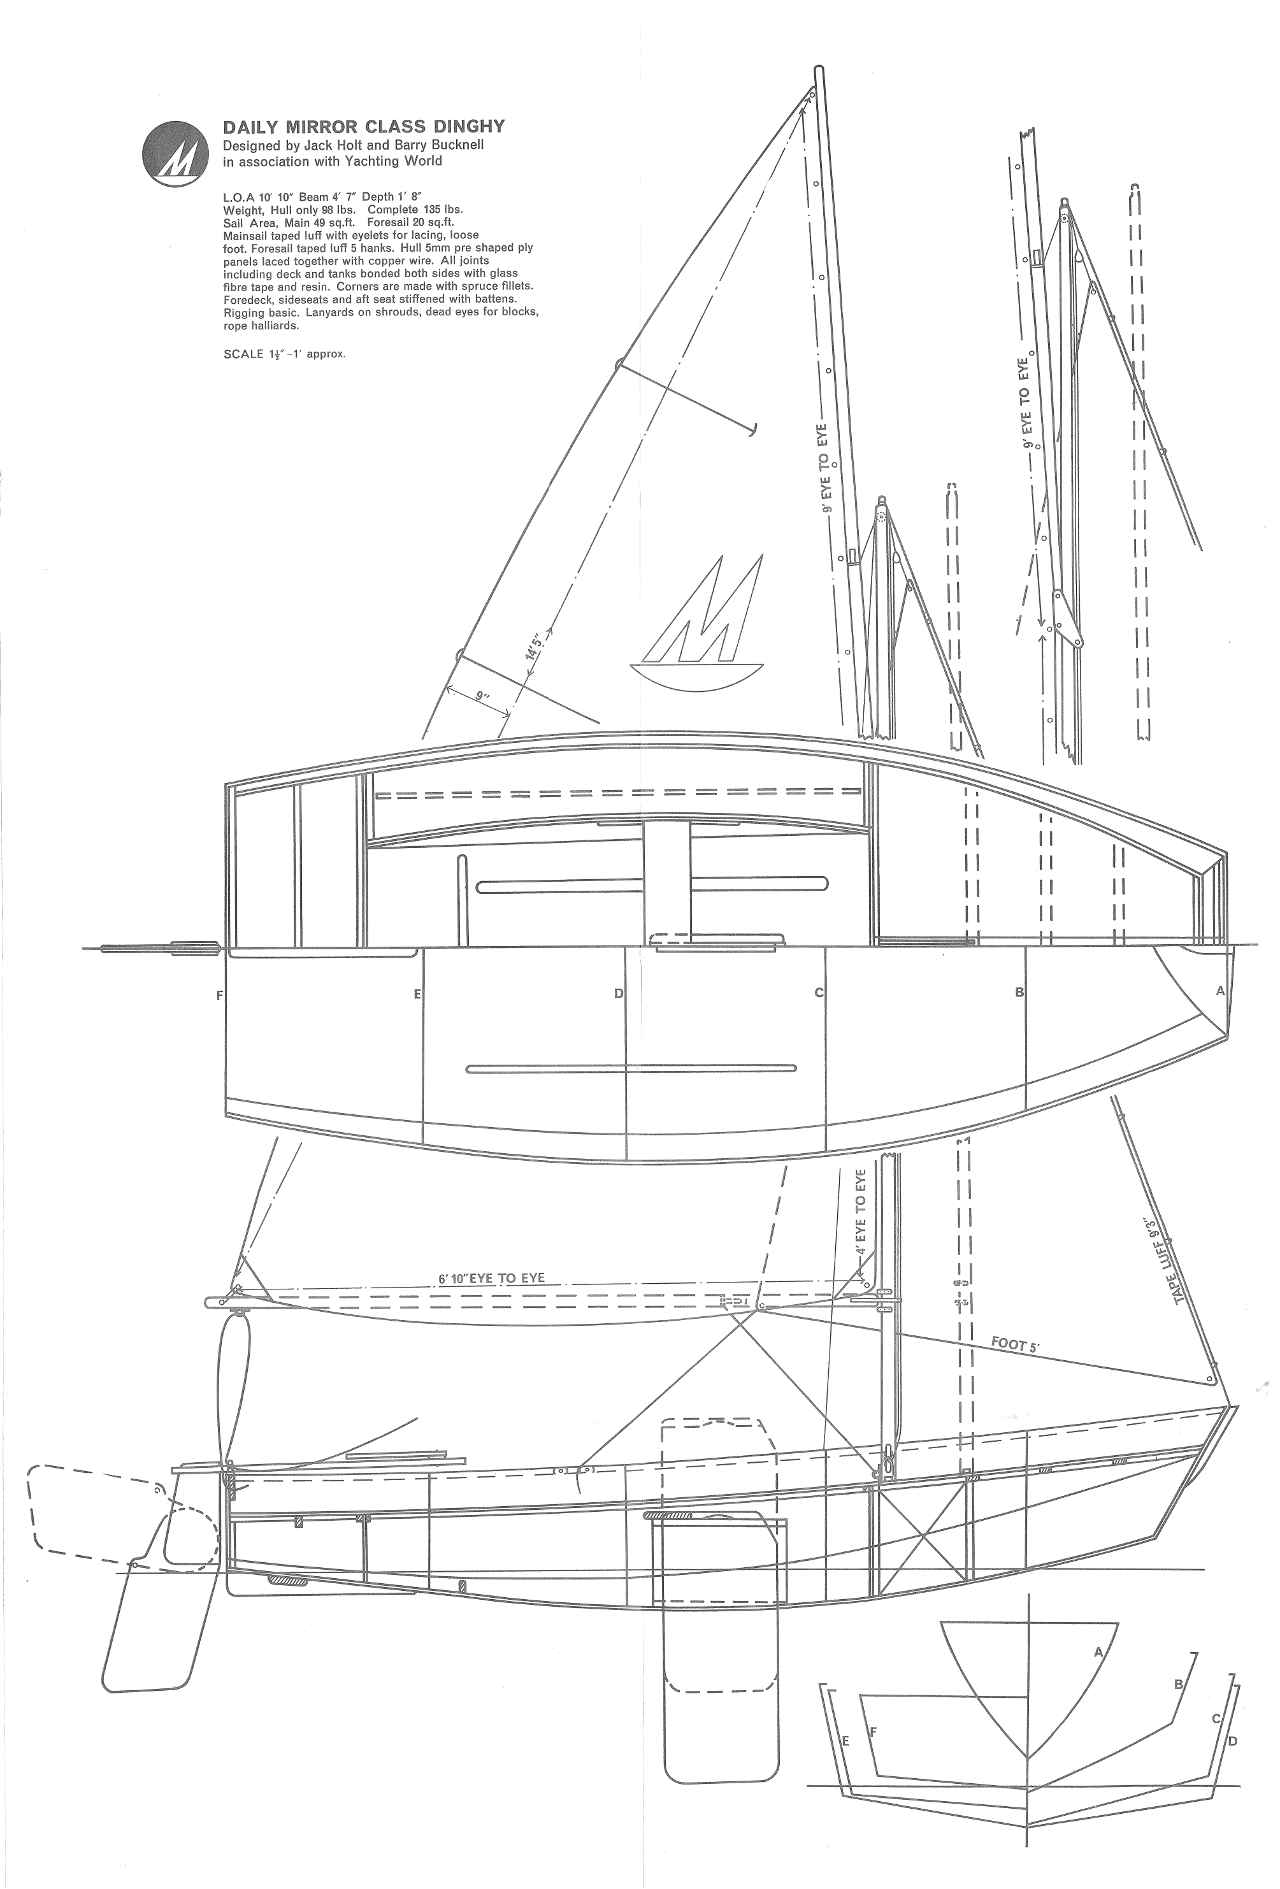 A technical specification drawing of a Mirror dinghy dating to around 1963